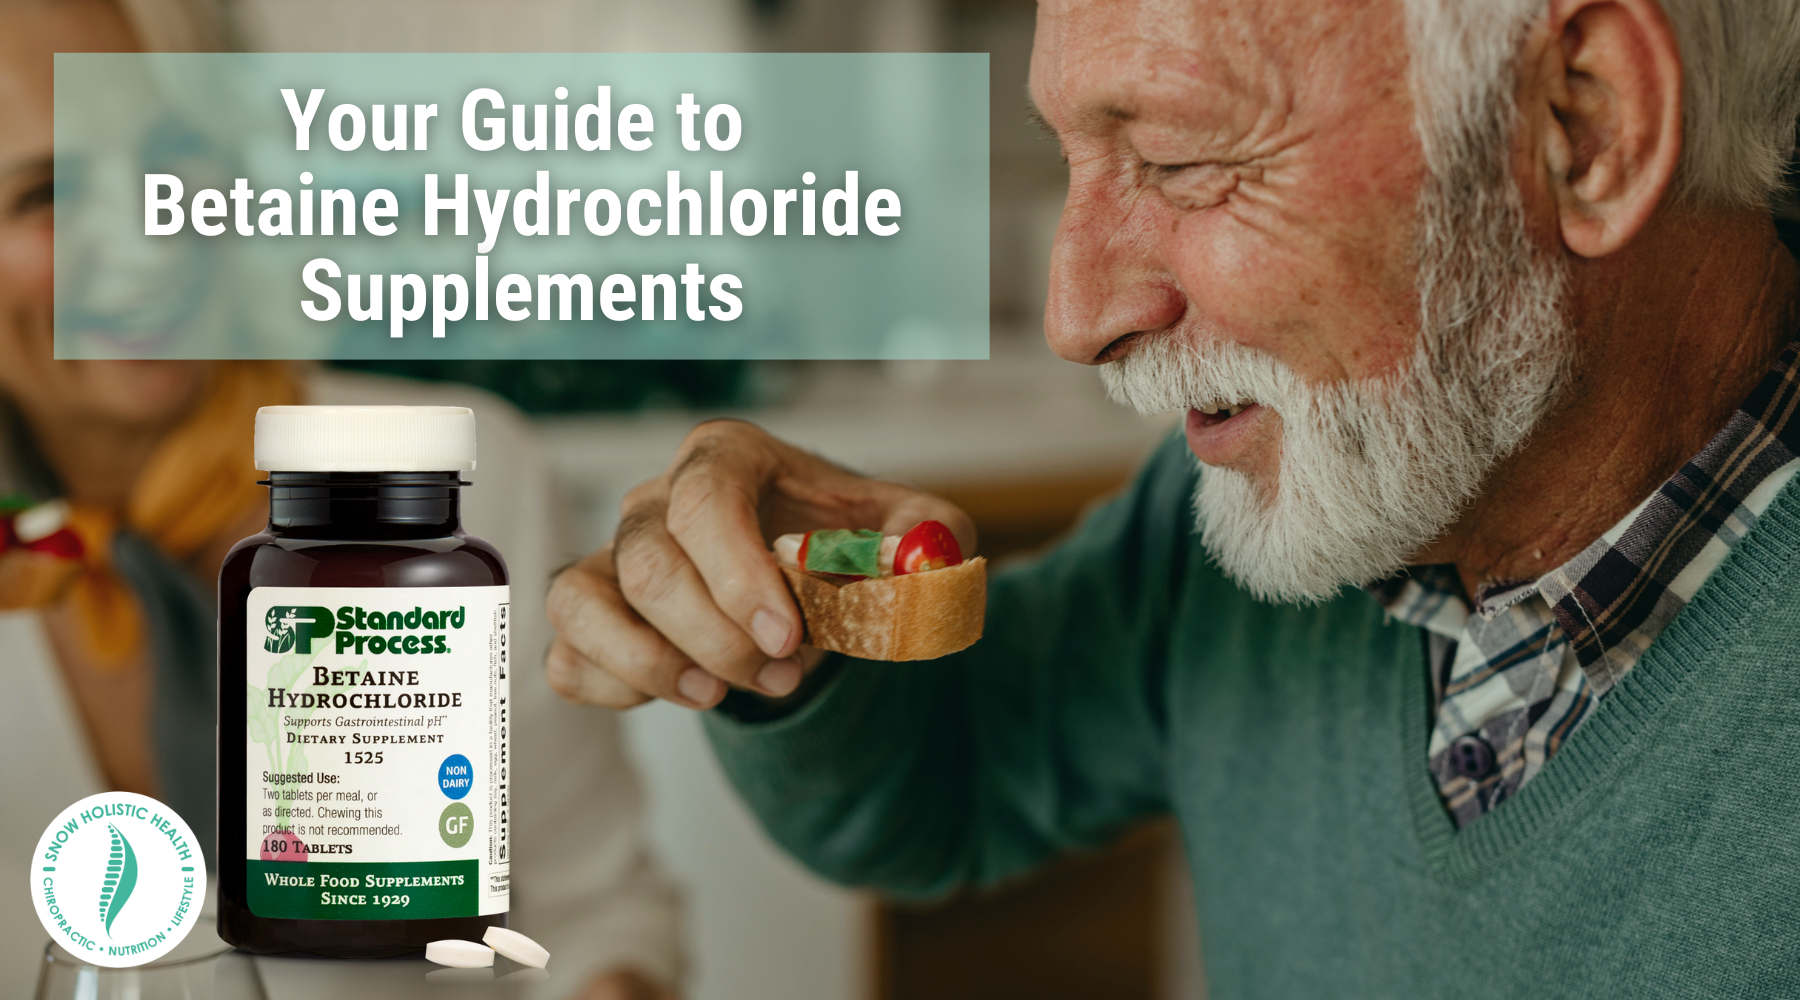 Your guide to Betaine Hydrochloride with image of man eating bruschetta and Standard Process Betaine Hydrochloride